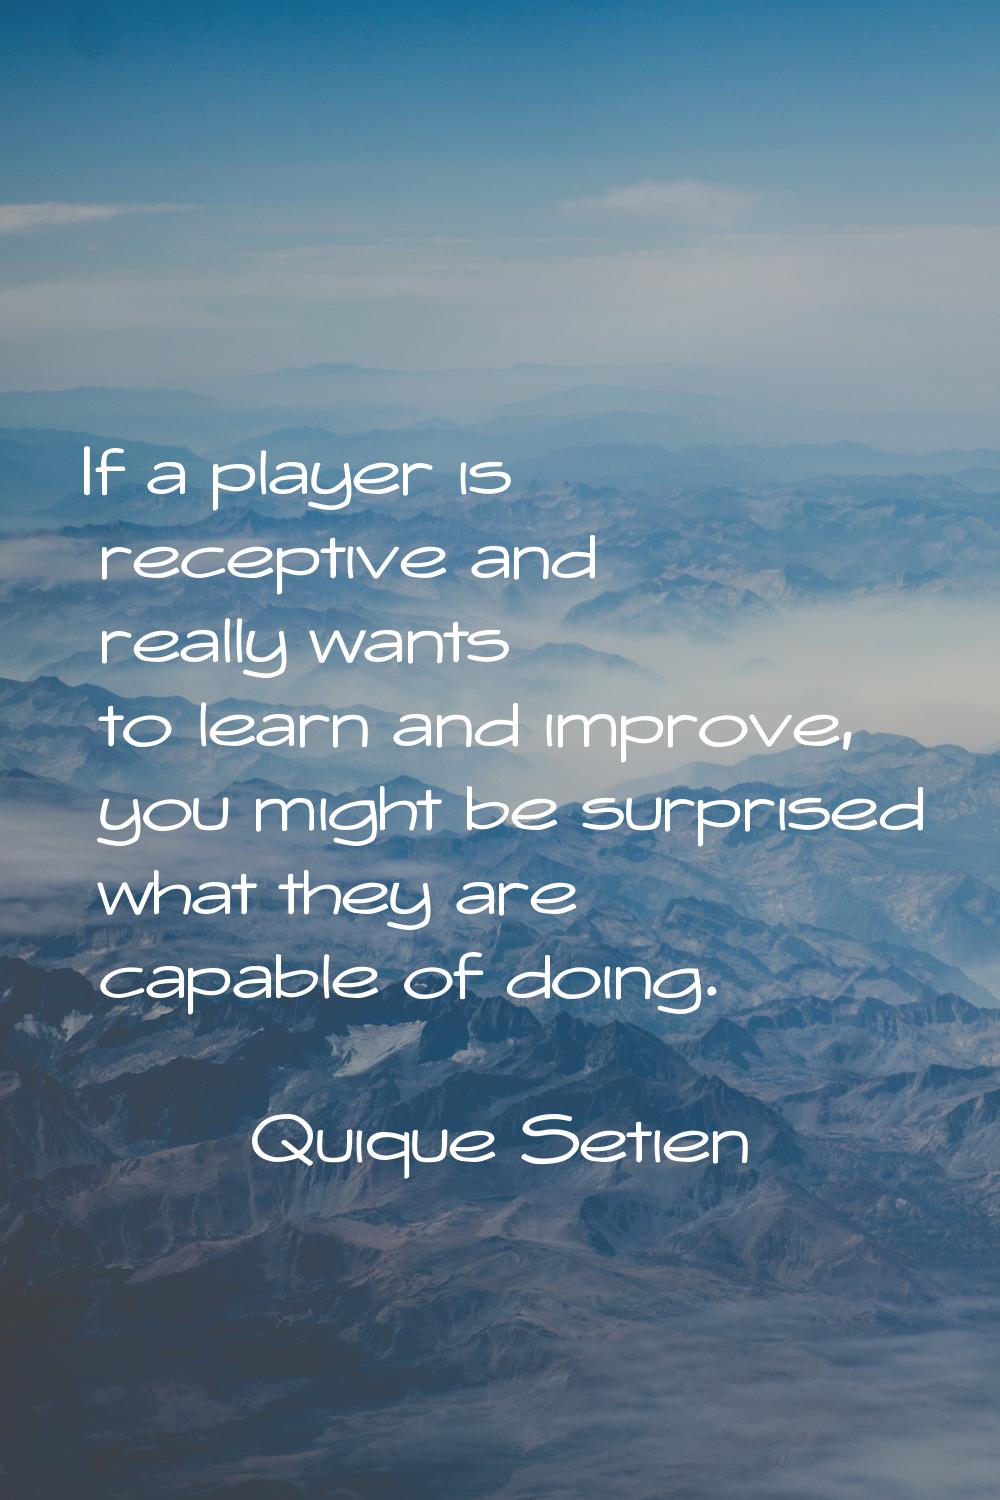 If a player is receptive and really wants to learn and improve, you might be surprised what they ar